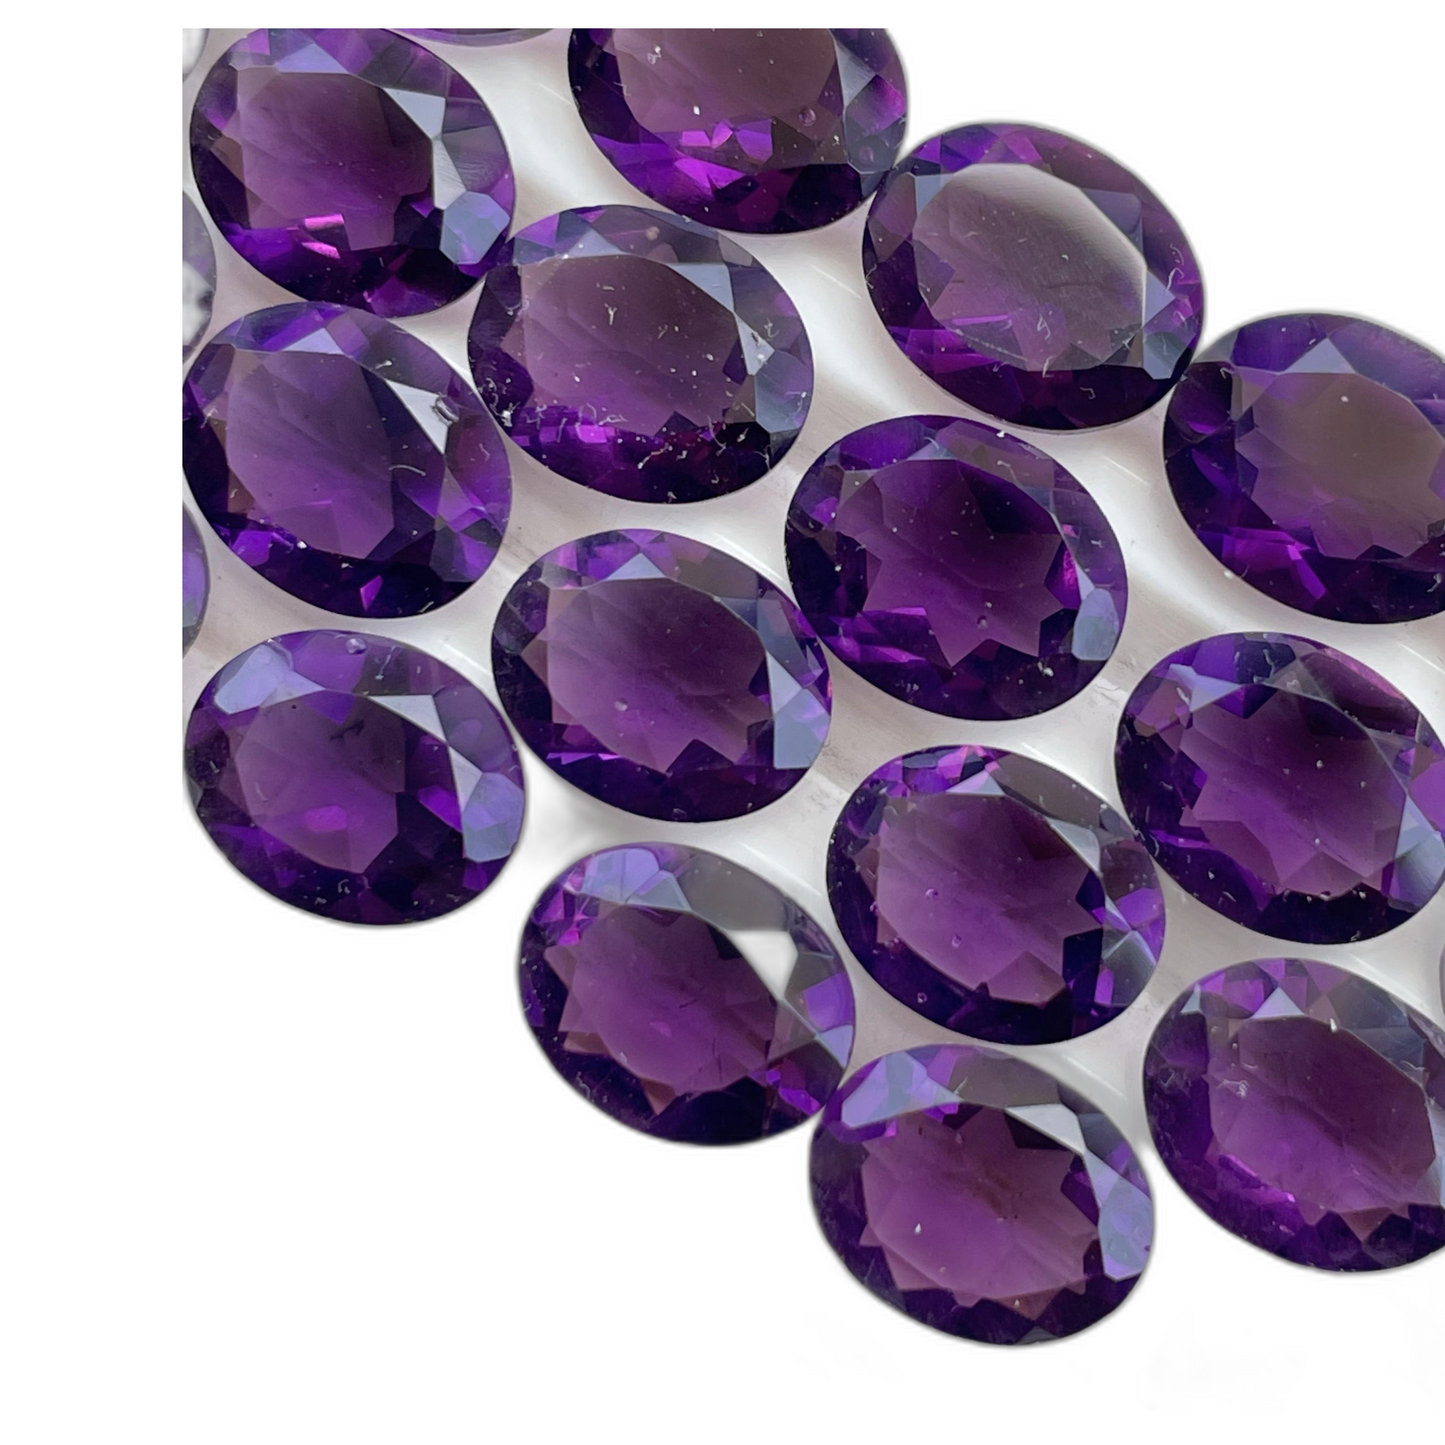 Purple Amethyst Faceted Nice Quality (8-10 mm) Oval Shape (Natural)